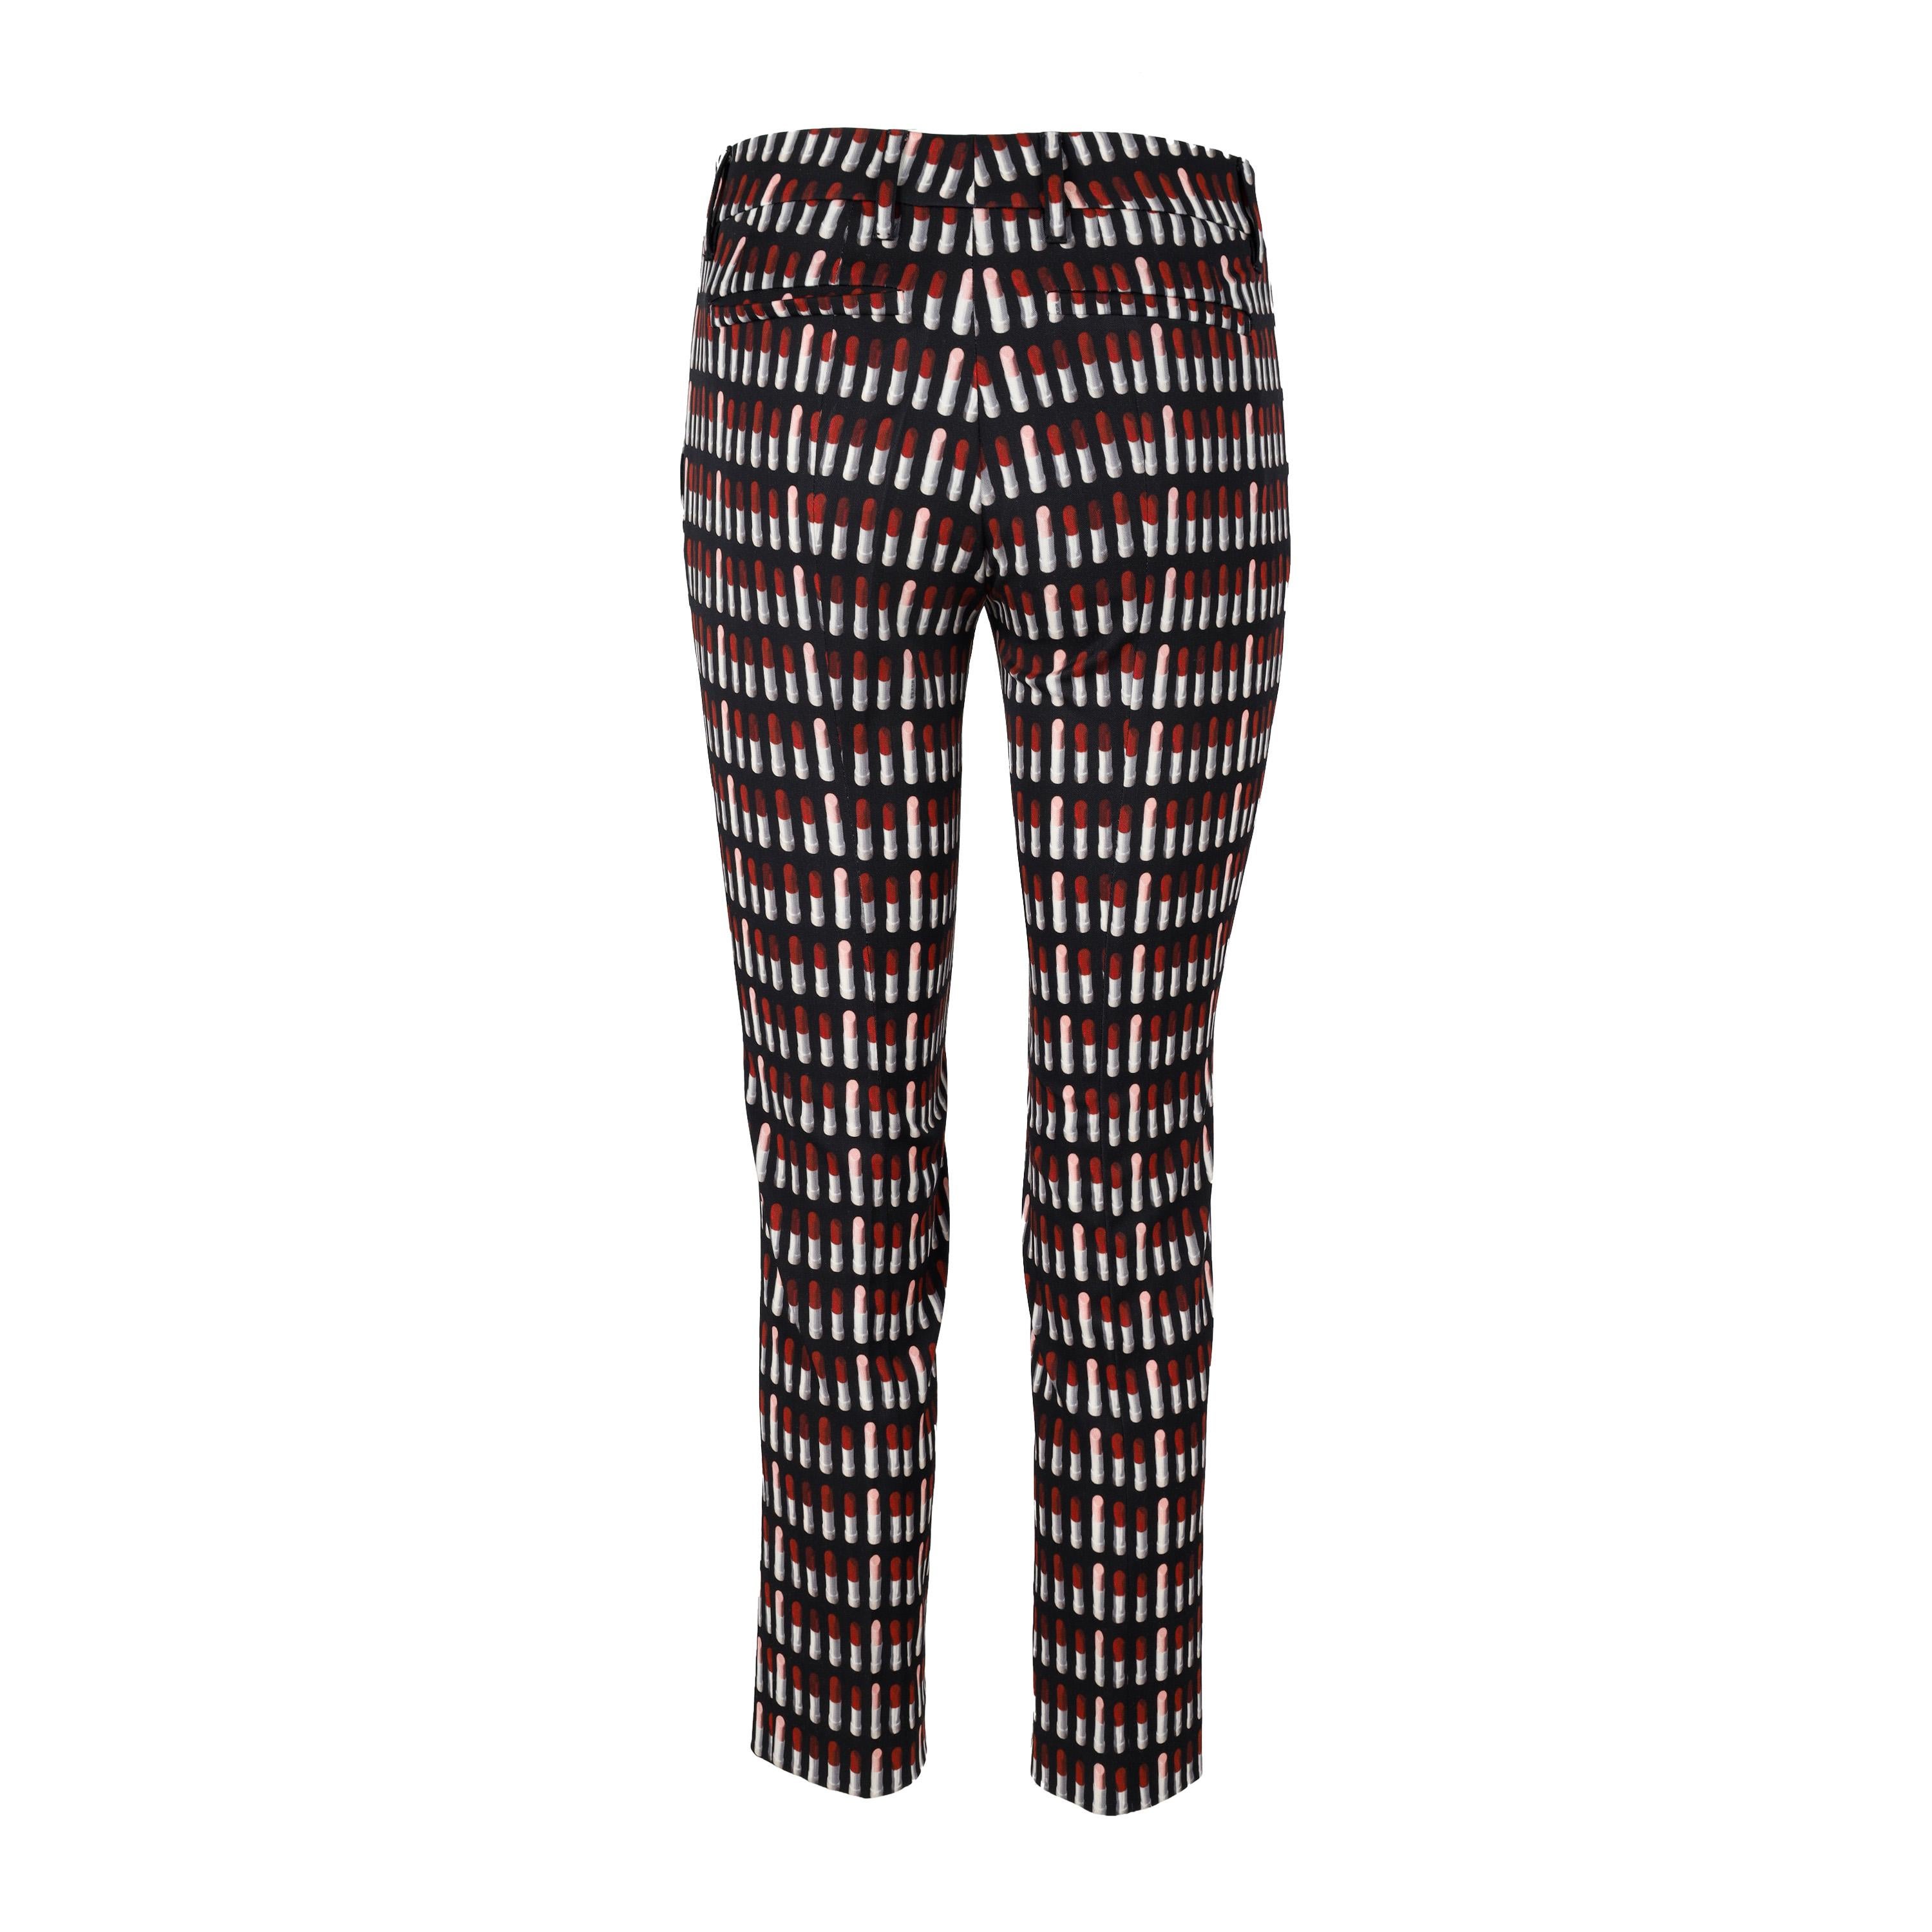 These Prada Lipstick Printed Pants are the perfect blend of fashion and comfort. Crafted from quality fabrics and designed with a flattering fit, they make a chic addition to any wardrobe. A unique lipstick print add a touch of bold style, while the